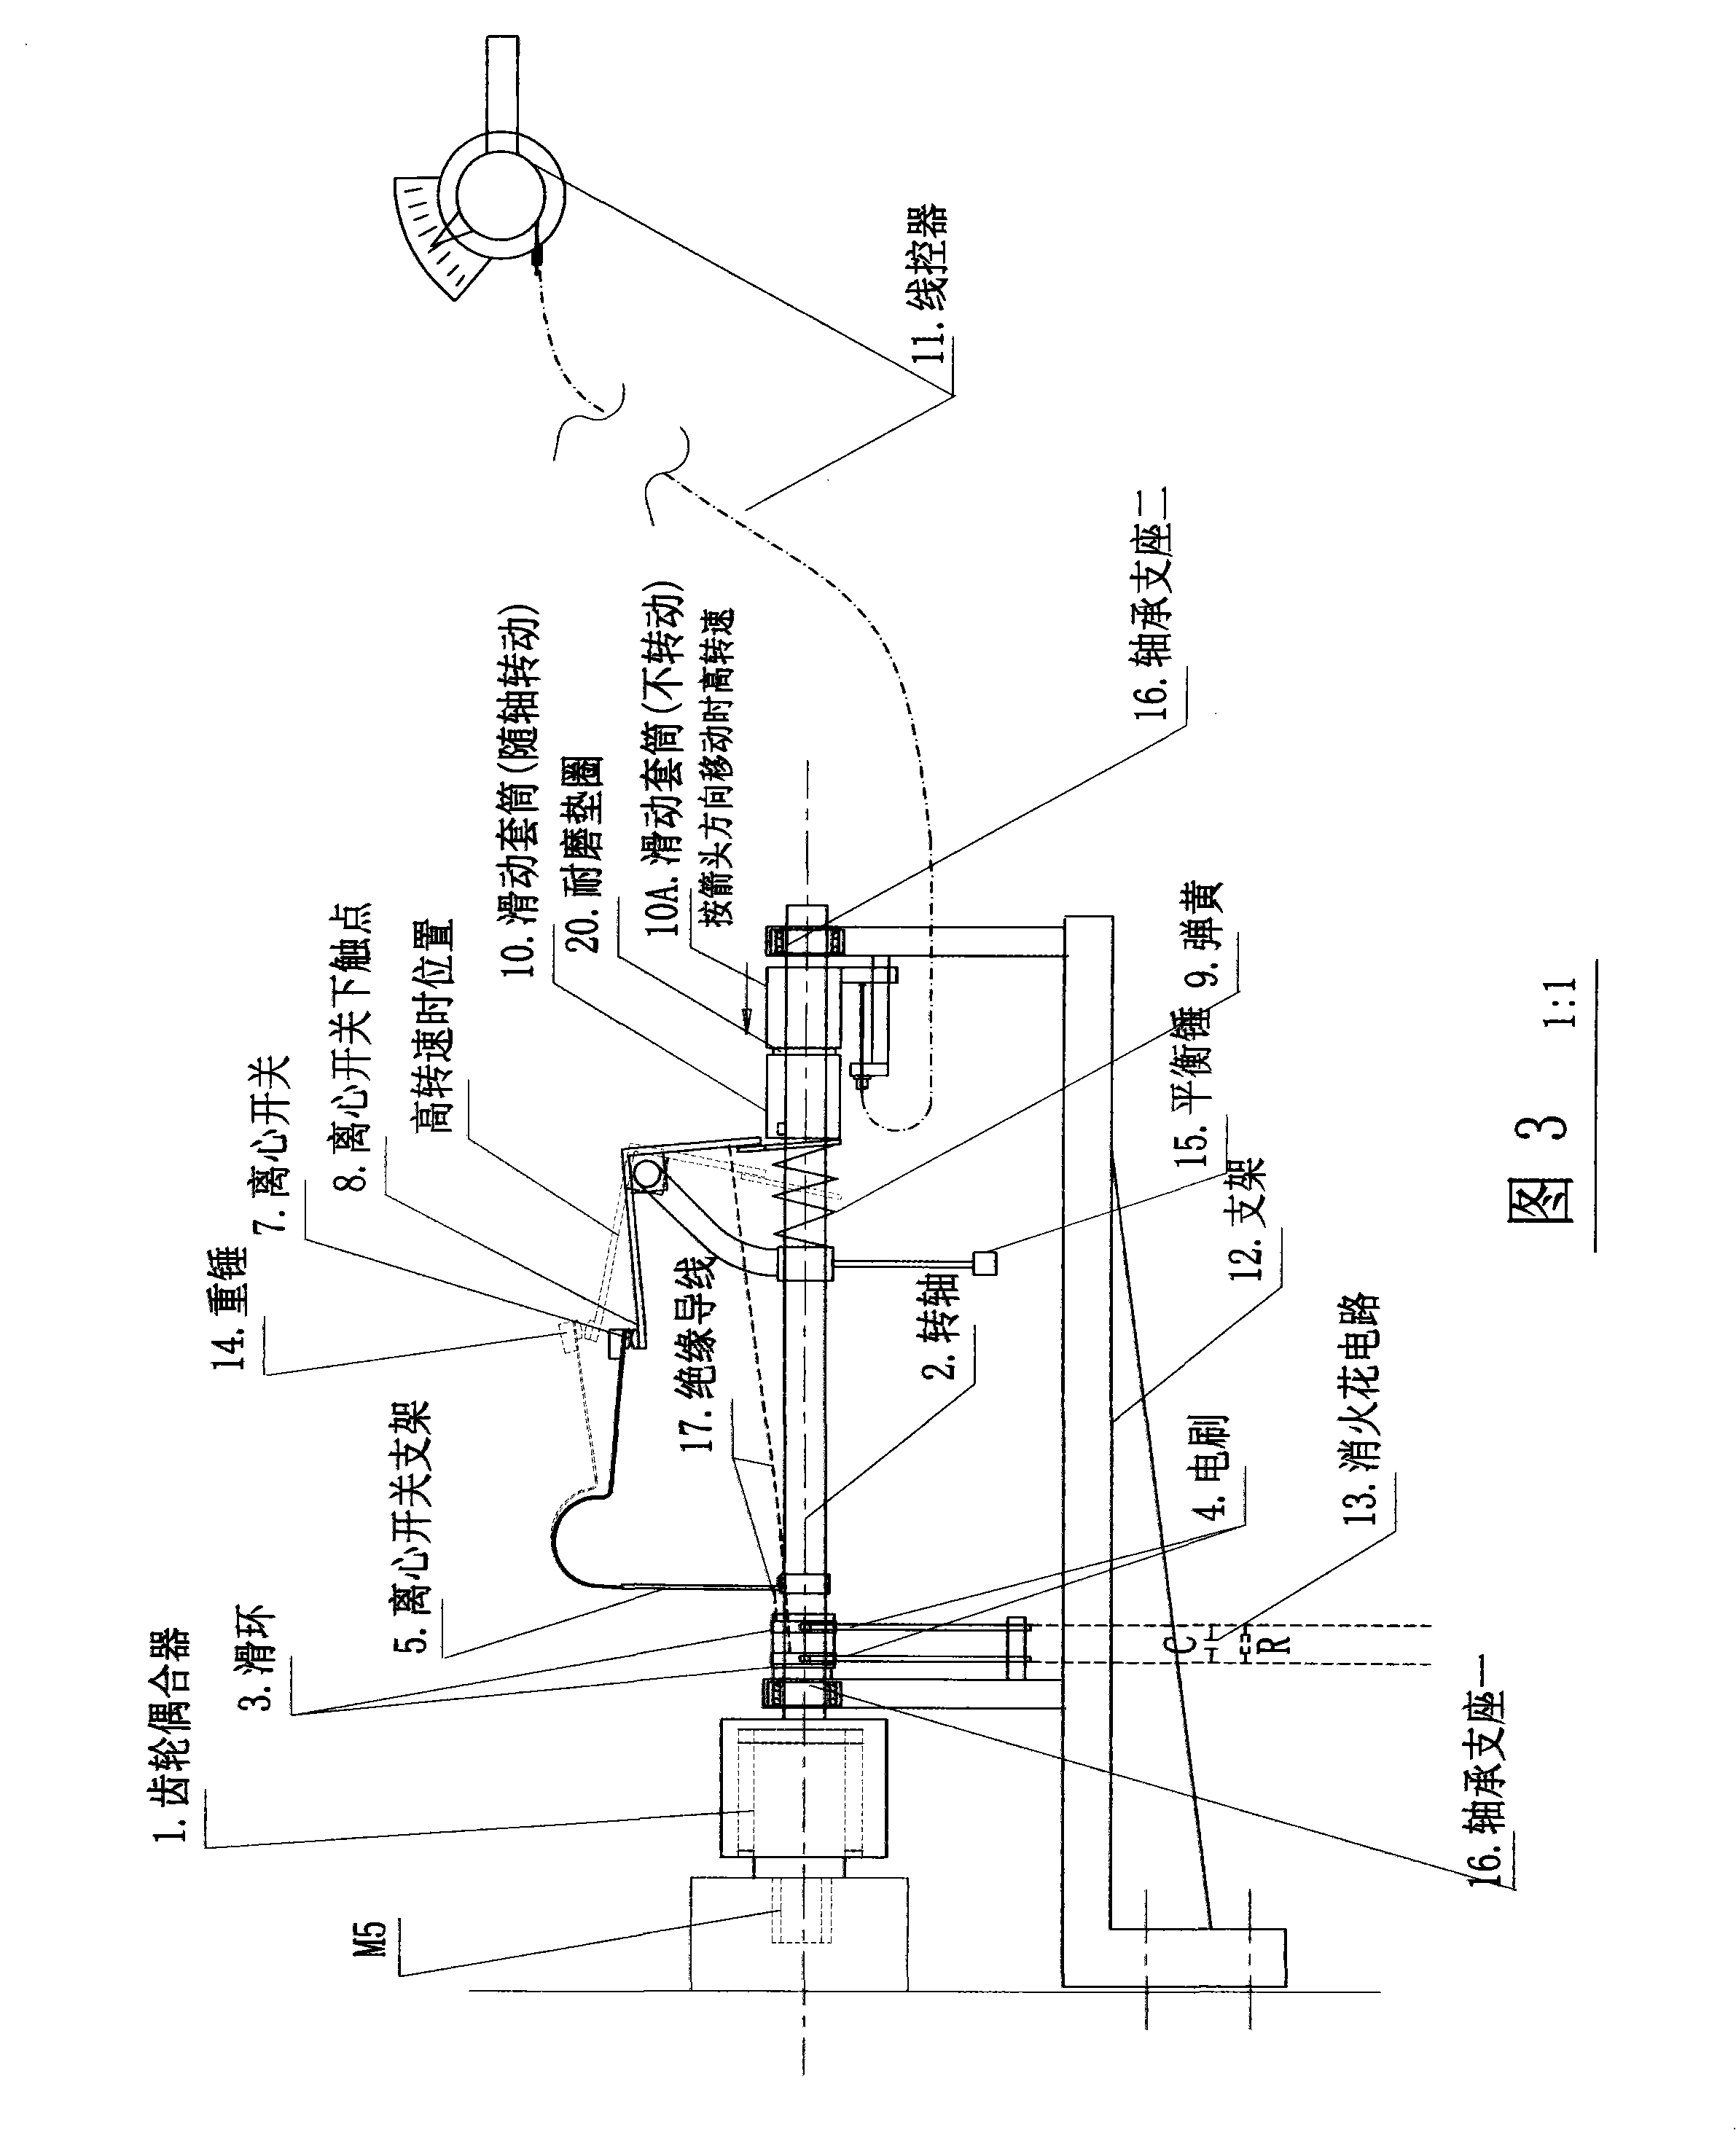 Acentric timing and speed-stabilized motor